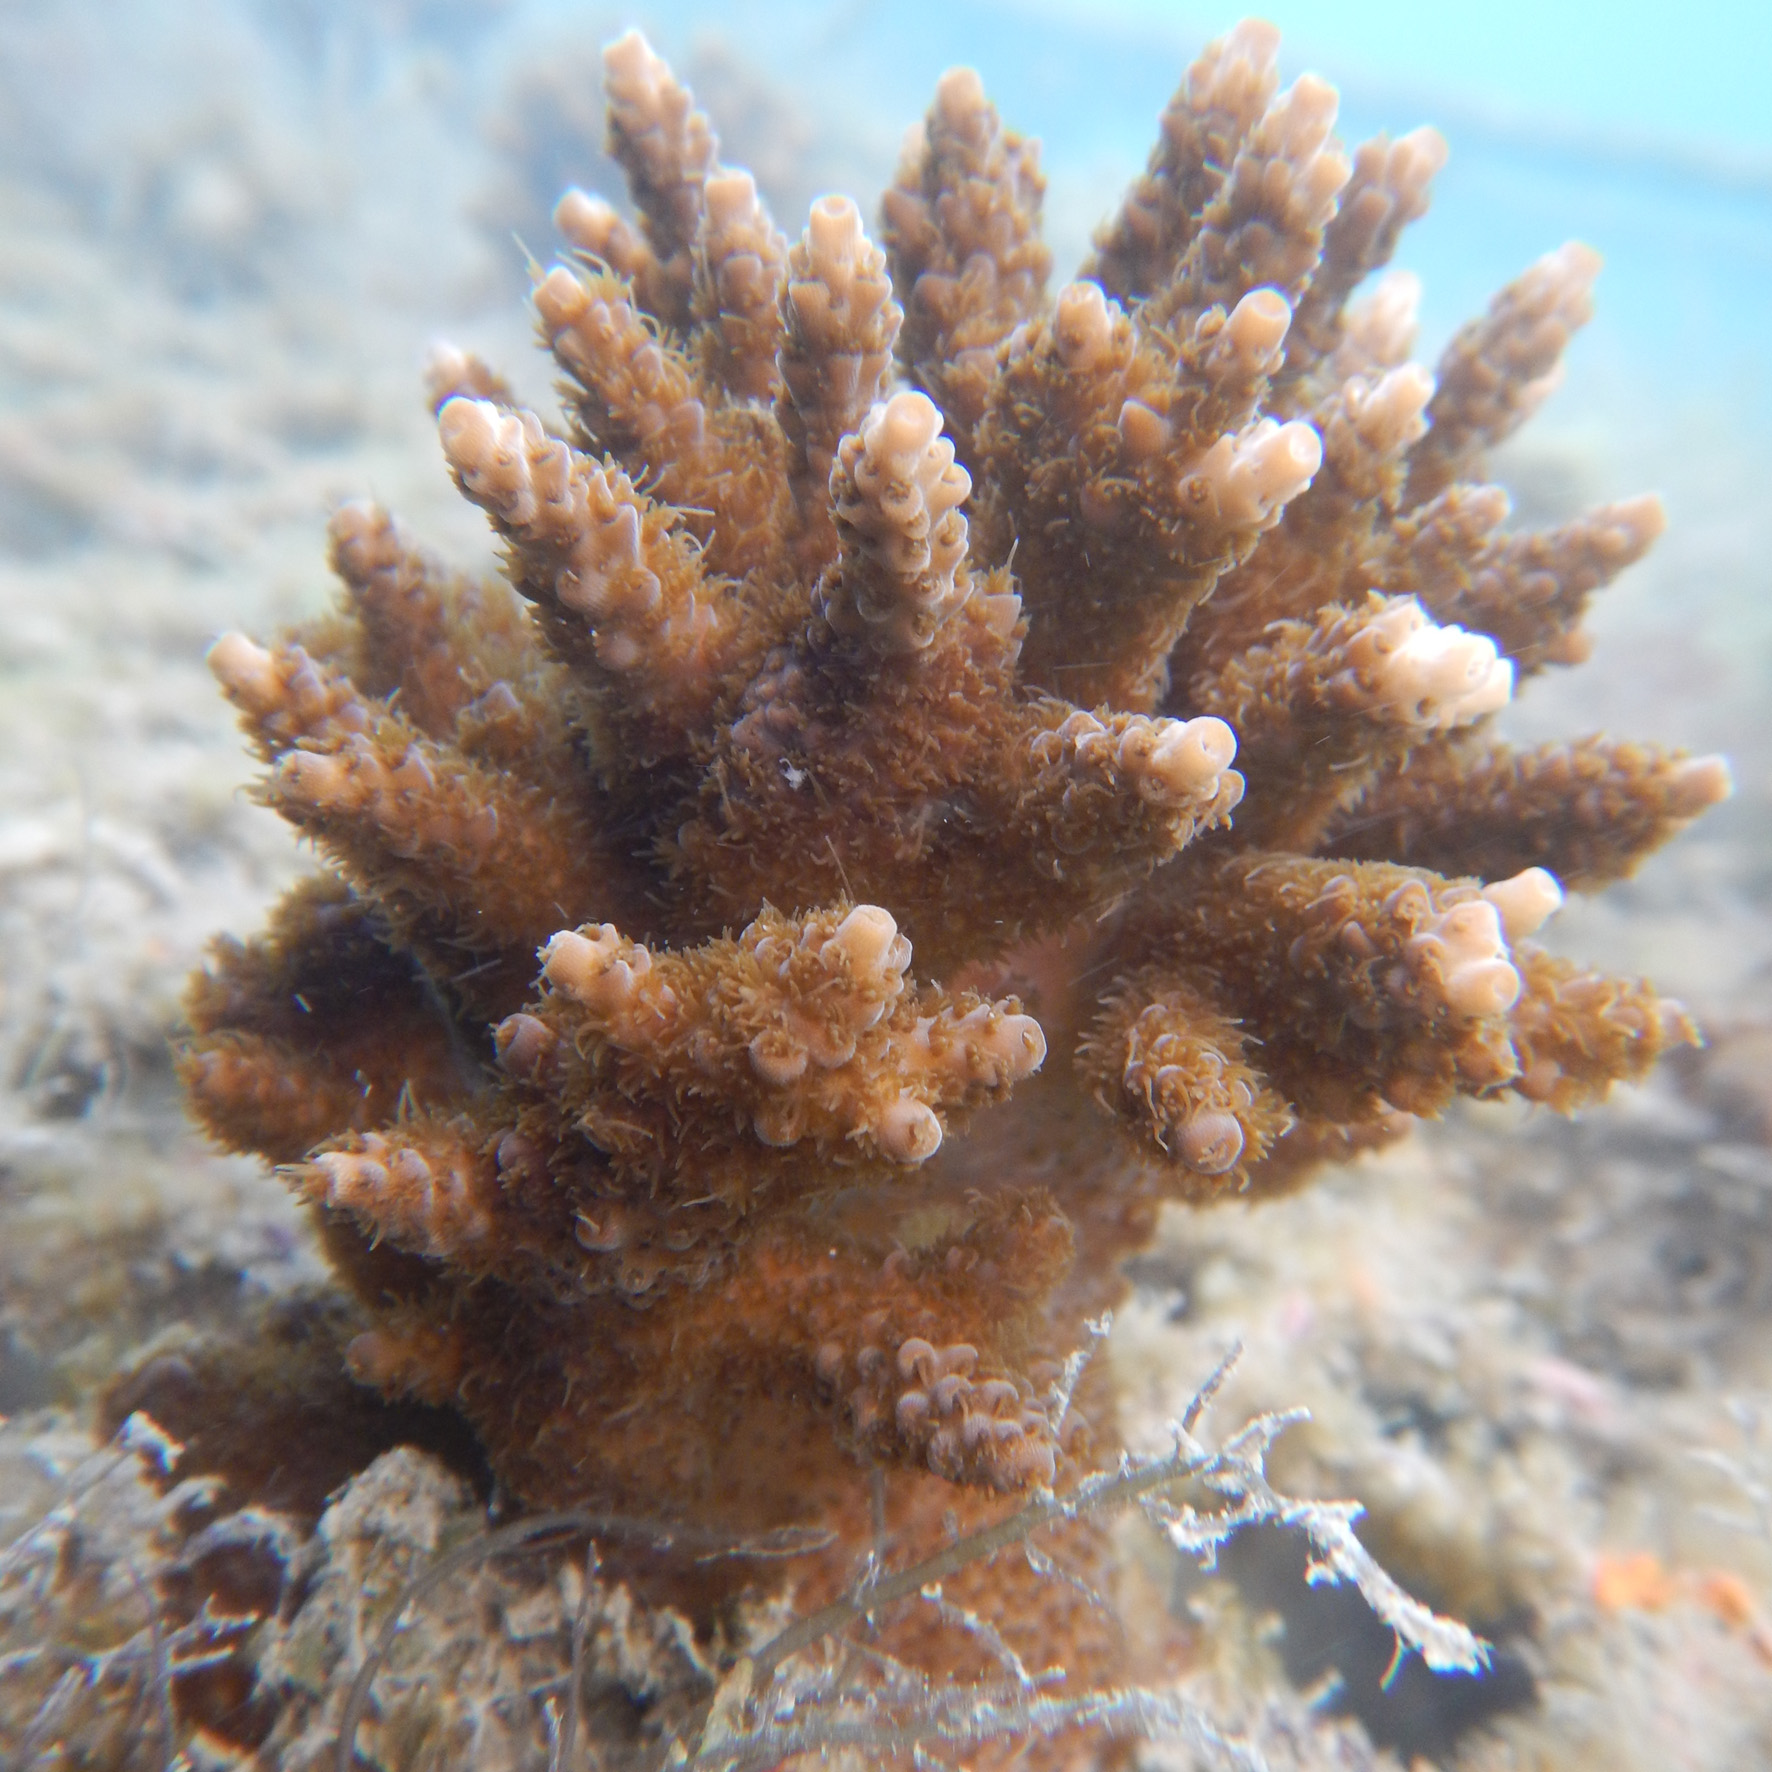 Transplanted Stag horn corals growing well